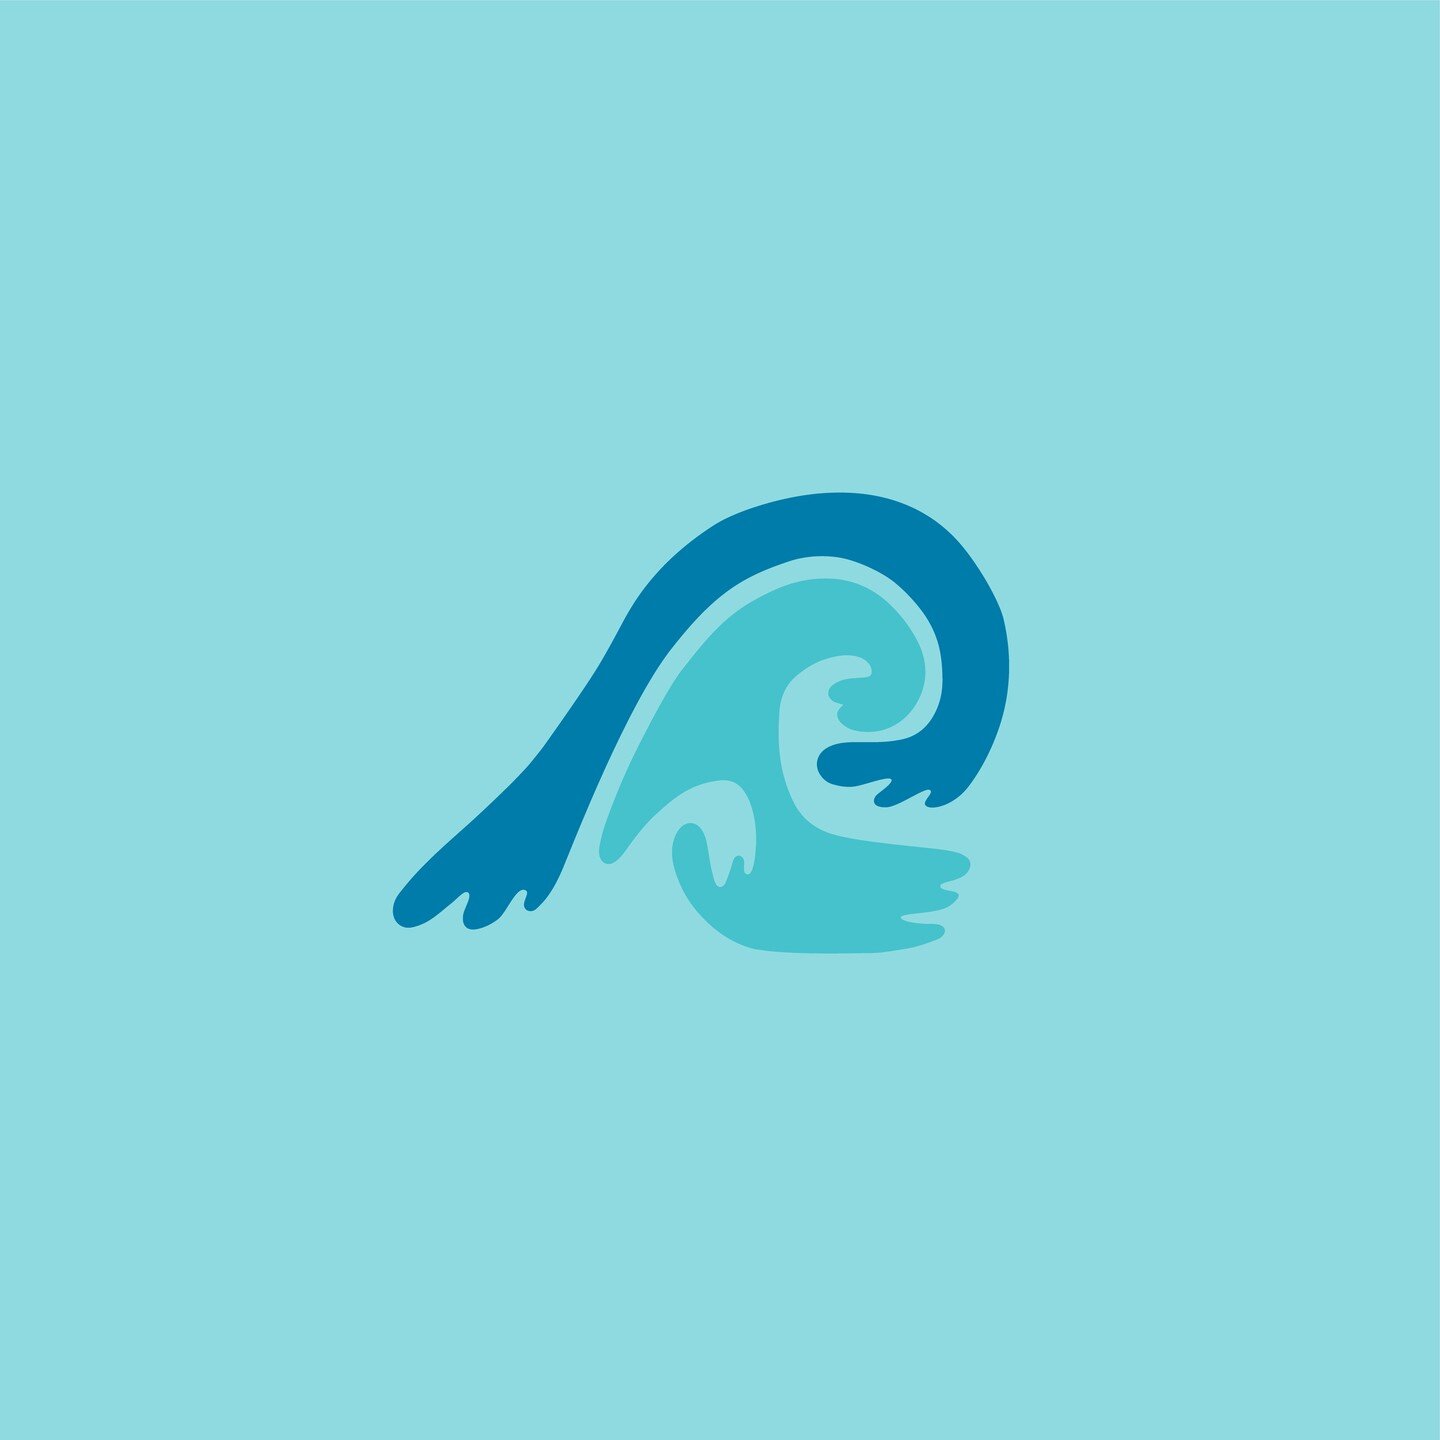 When two become one 🌊

Created a cute little 'helping hands wave' logo mark to pair with the custom type I created for Nicole's charity foundation a few months earlier. Now her brand is complete!

Check out @journeyofamermaid902 to see what wonderfu